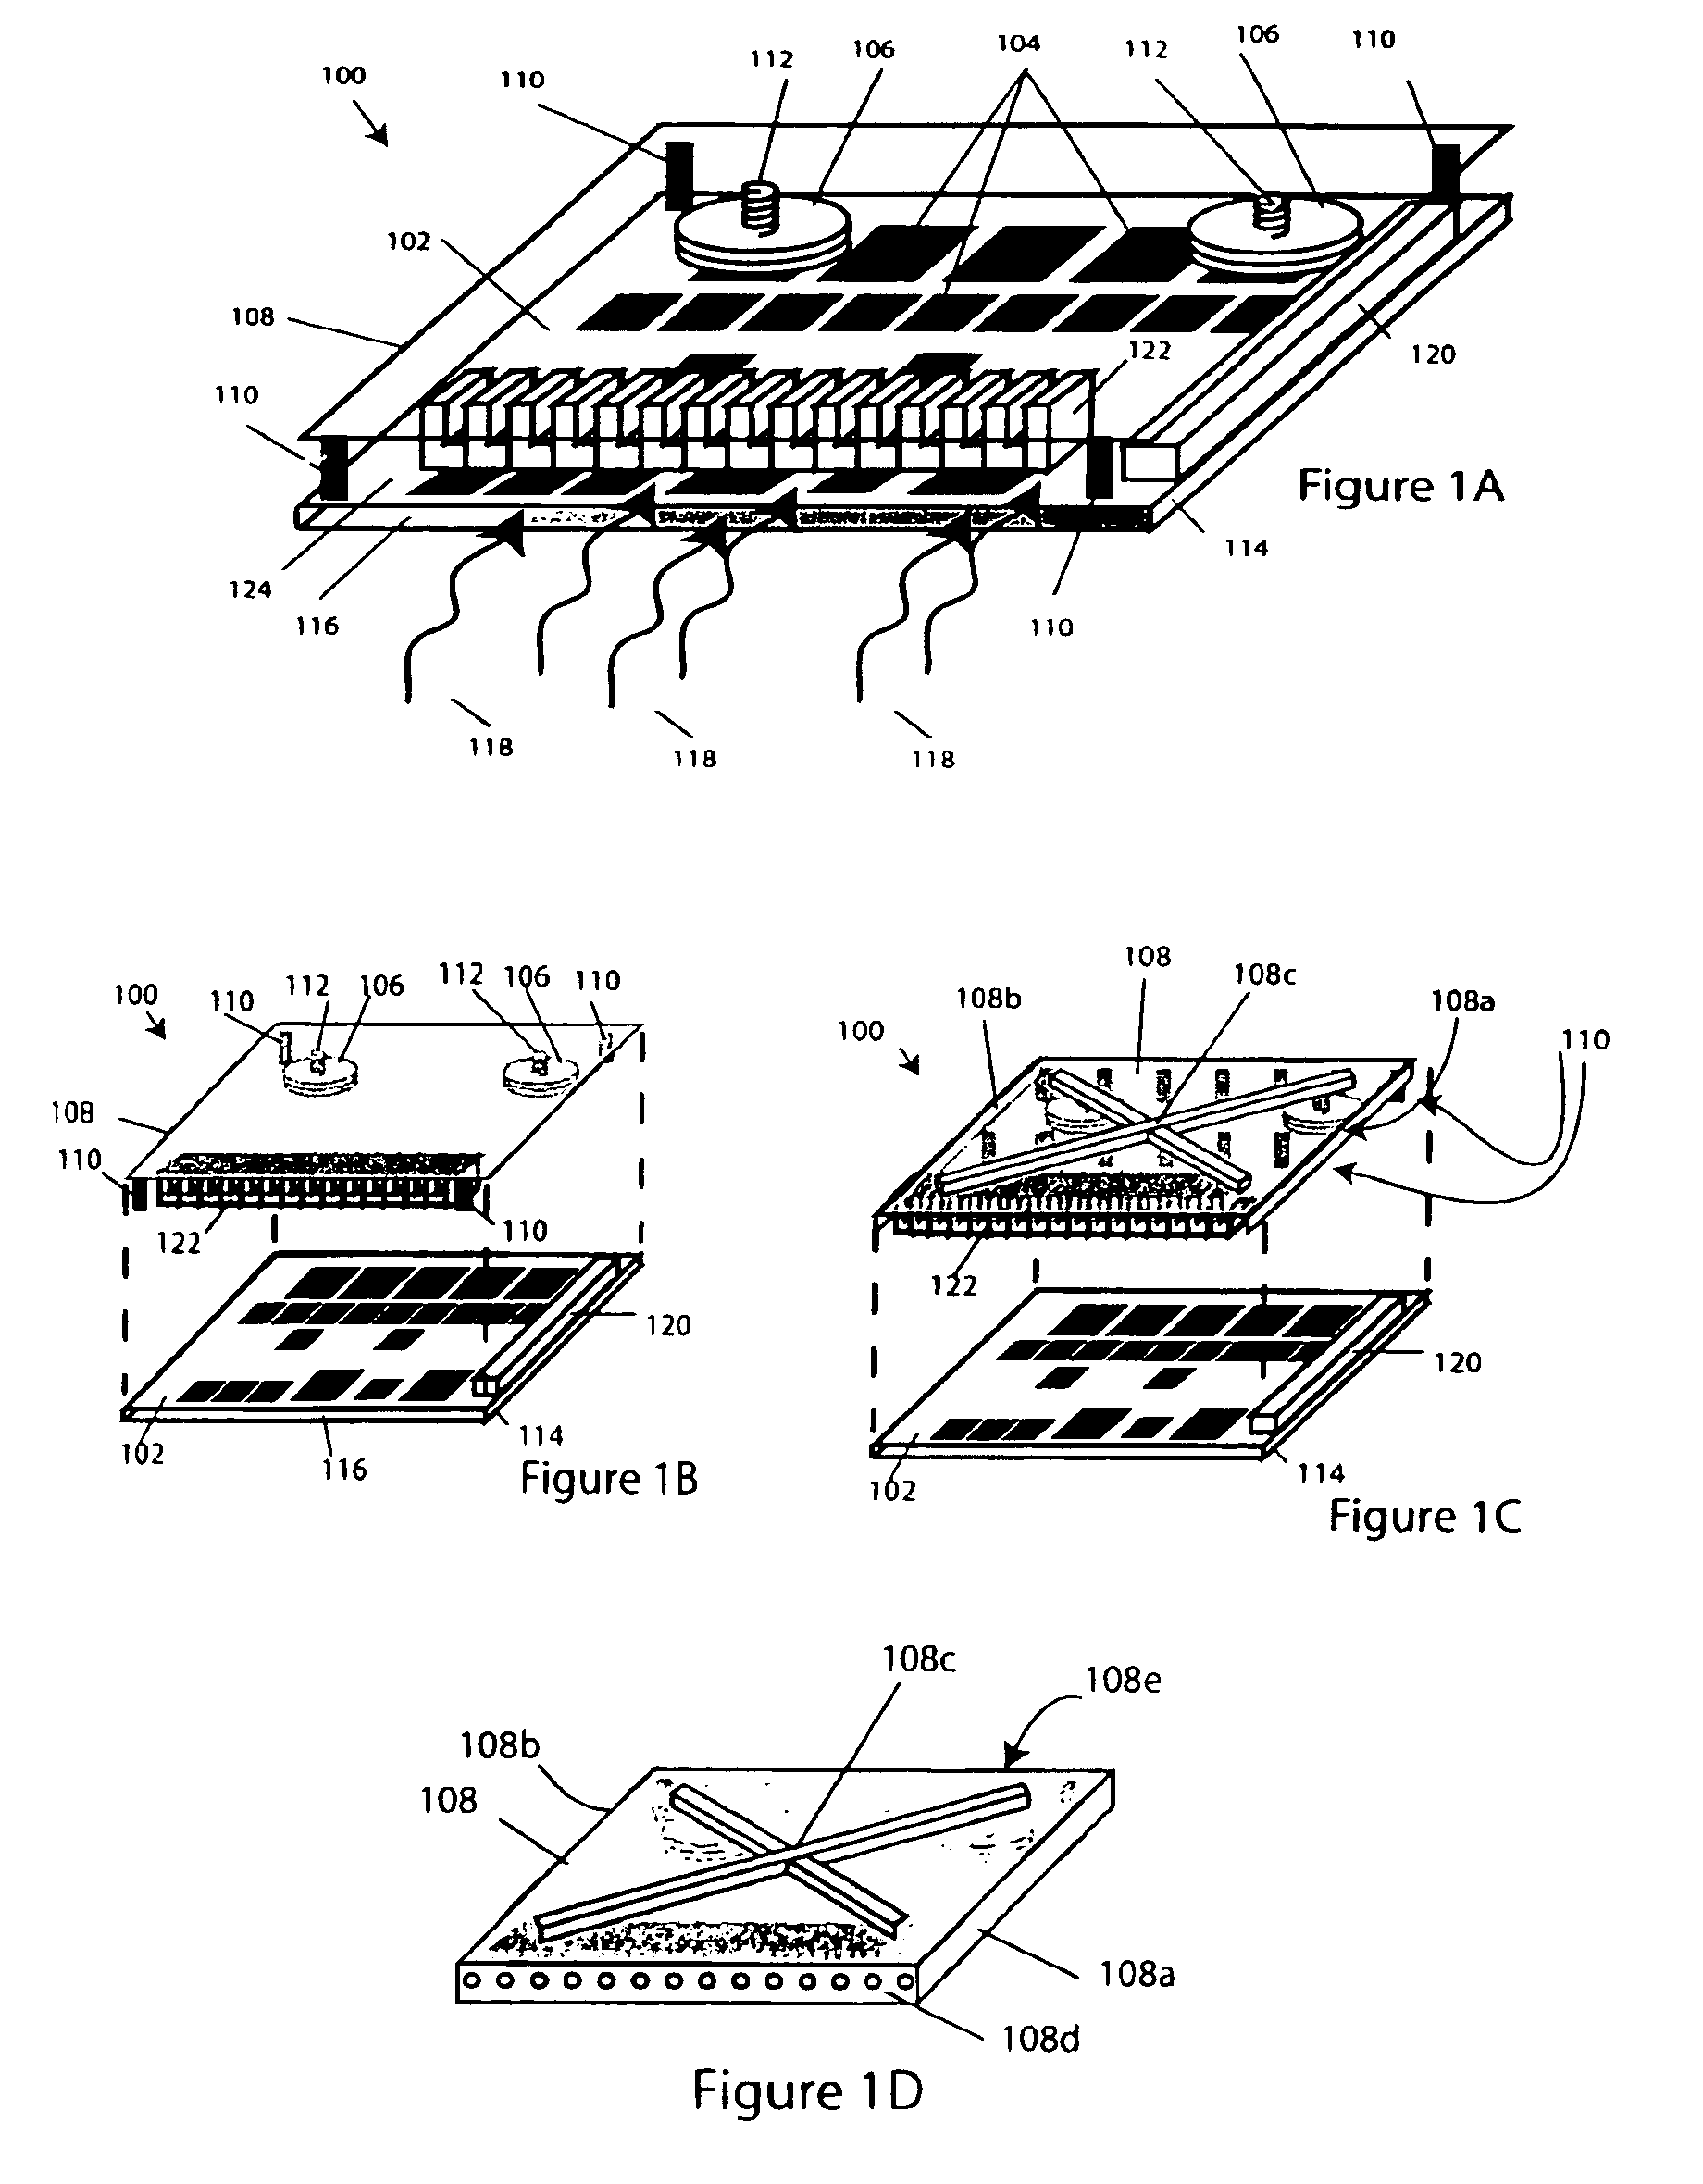 Central inlet circuit board assembly